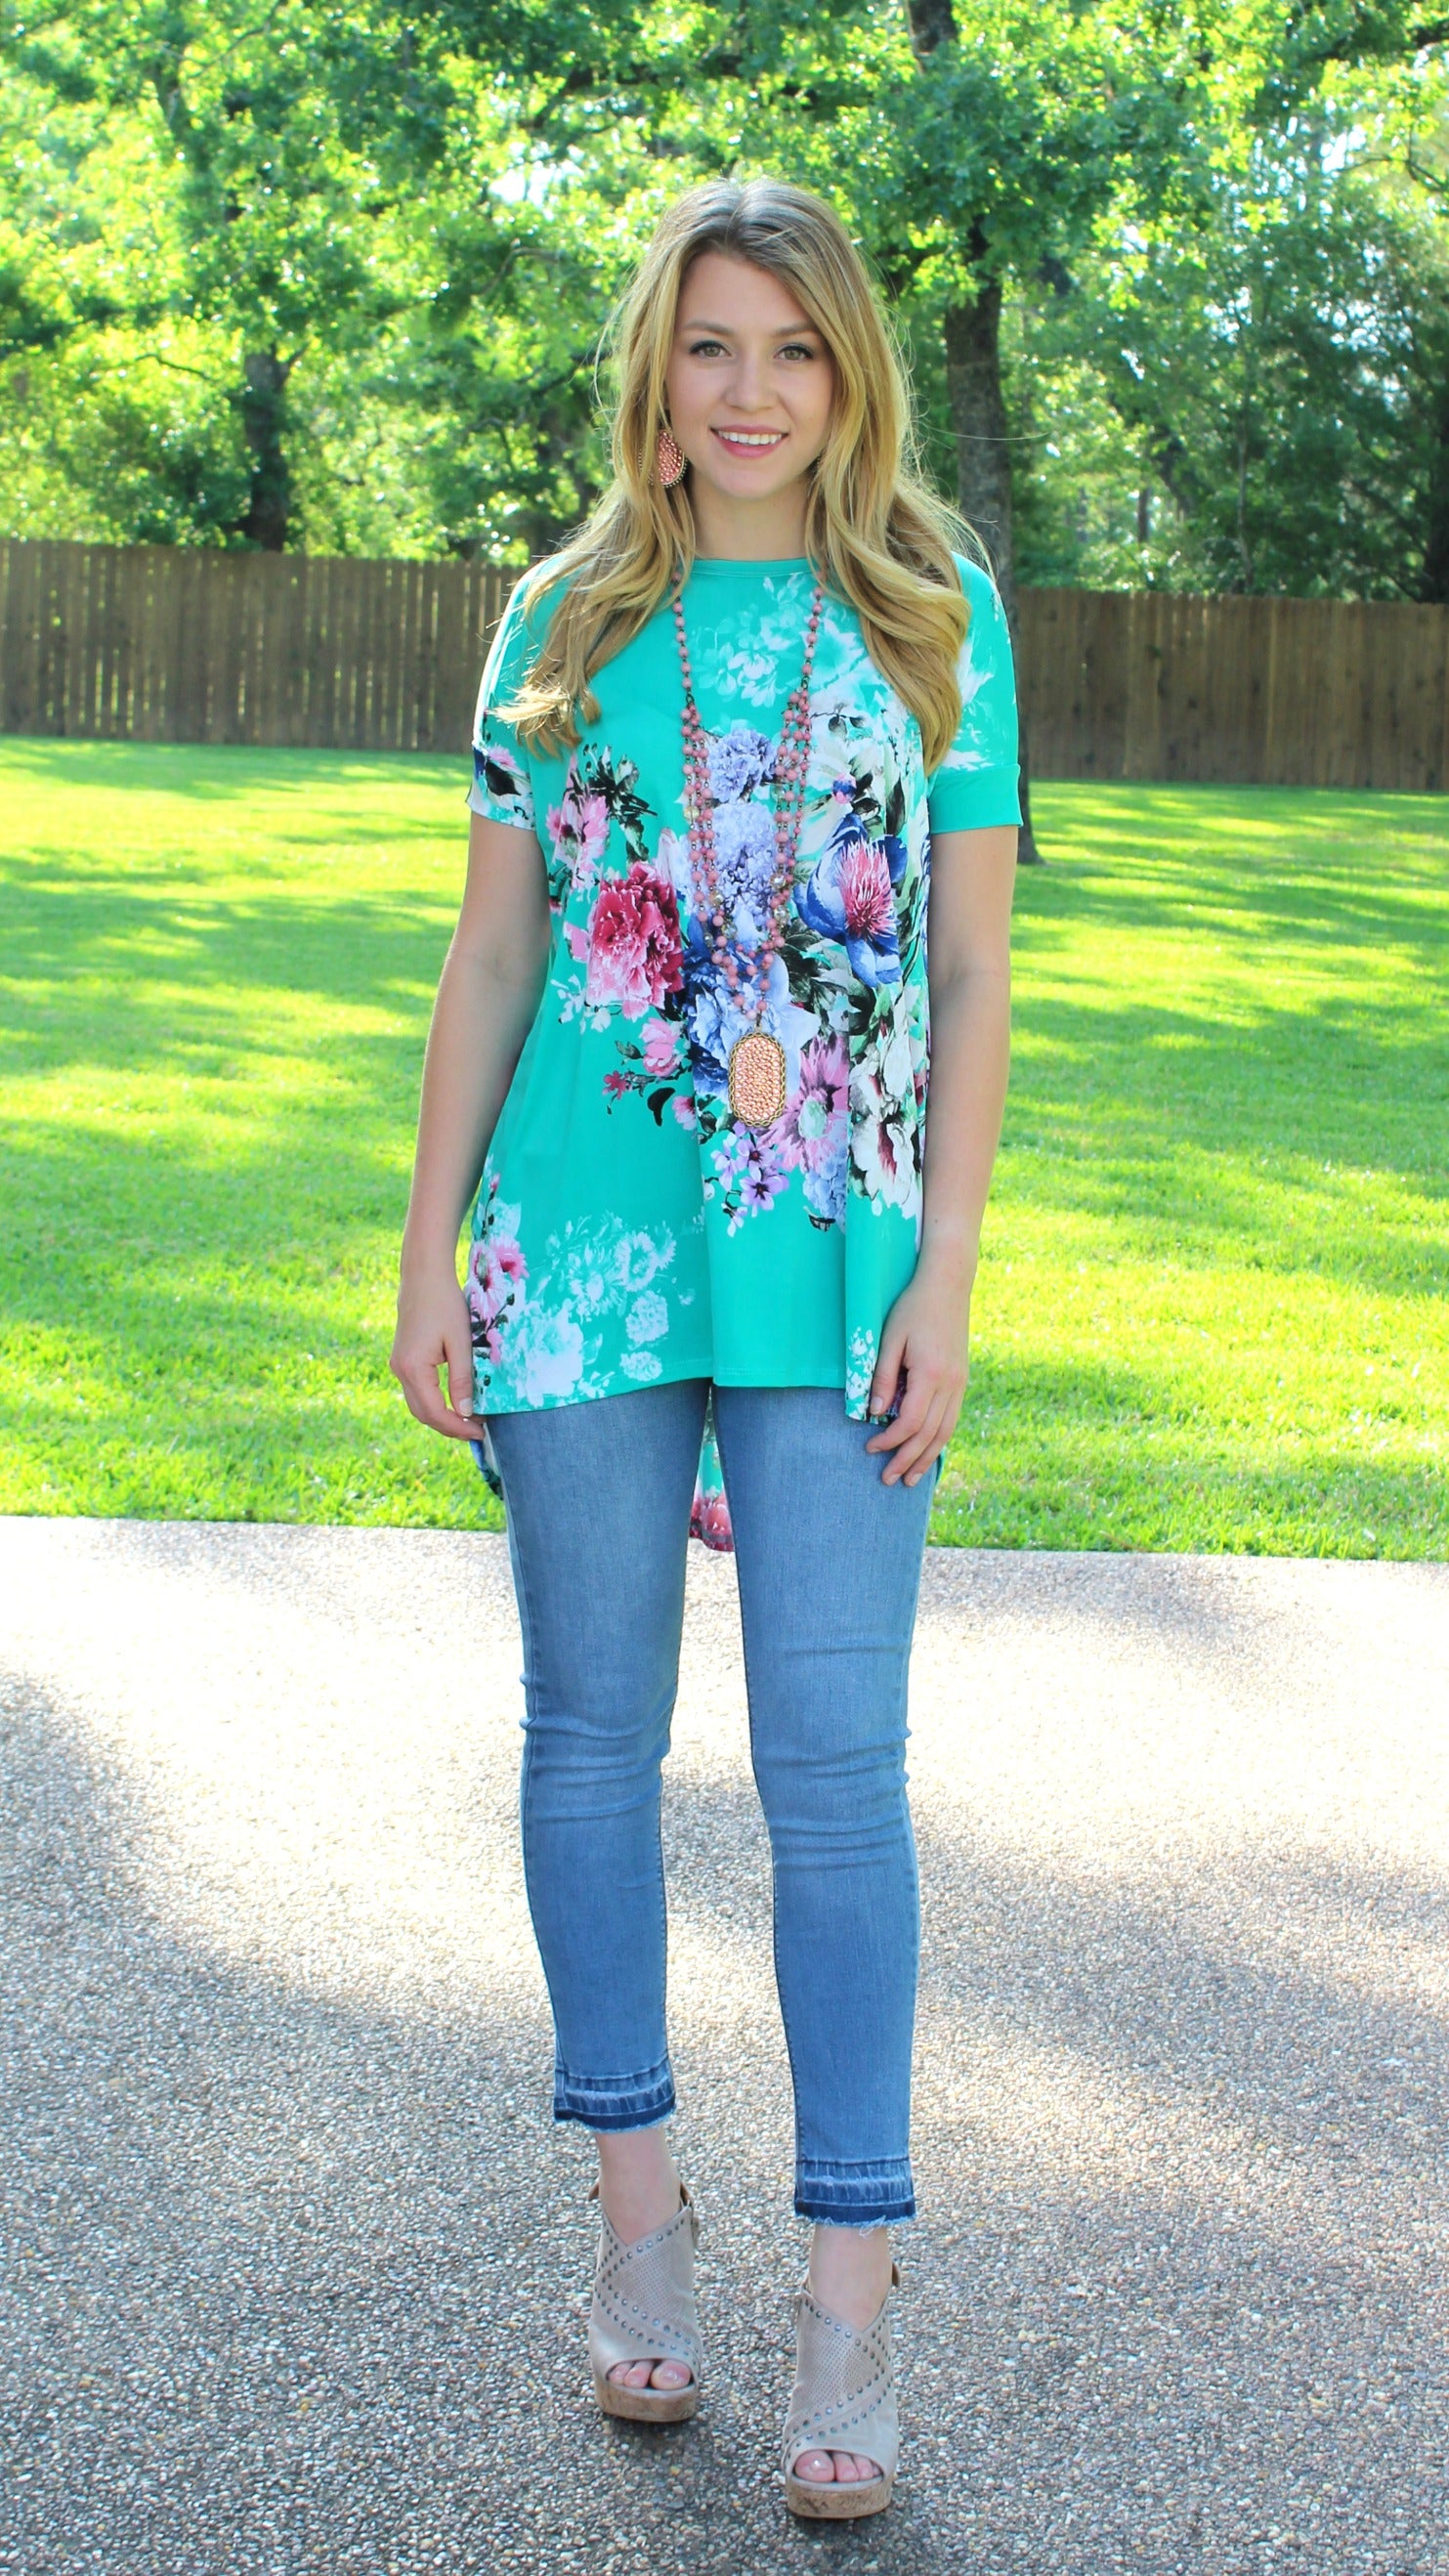 Last Chance Size Small | Something You Never Had Floral High-Low Tunic in Mint - Giddy Up Glamour Boutique